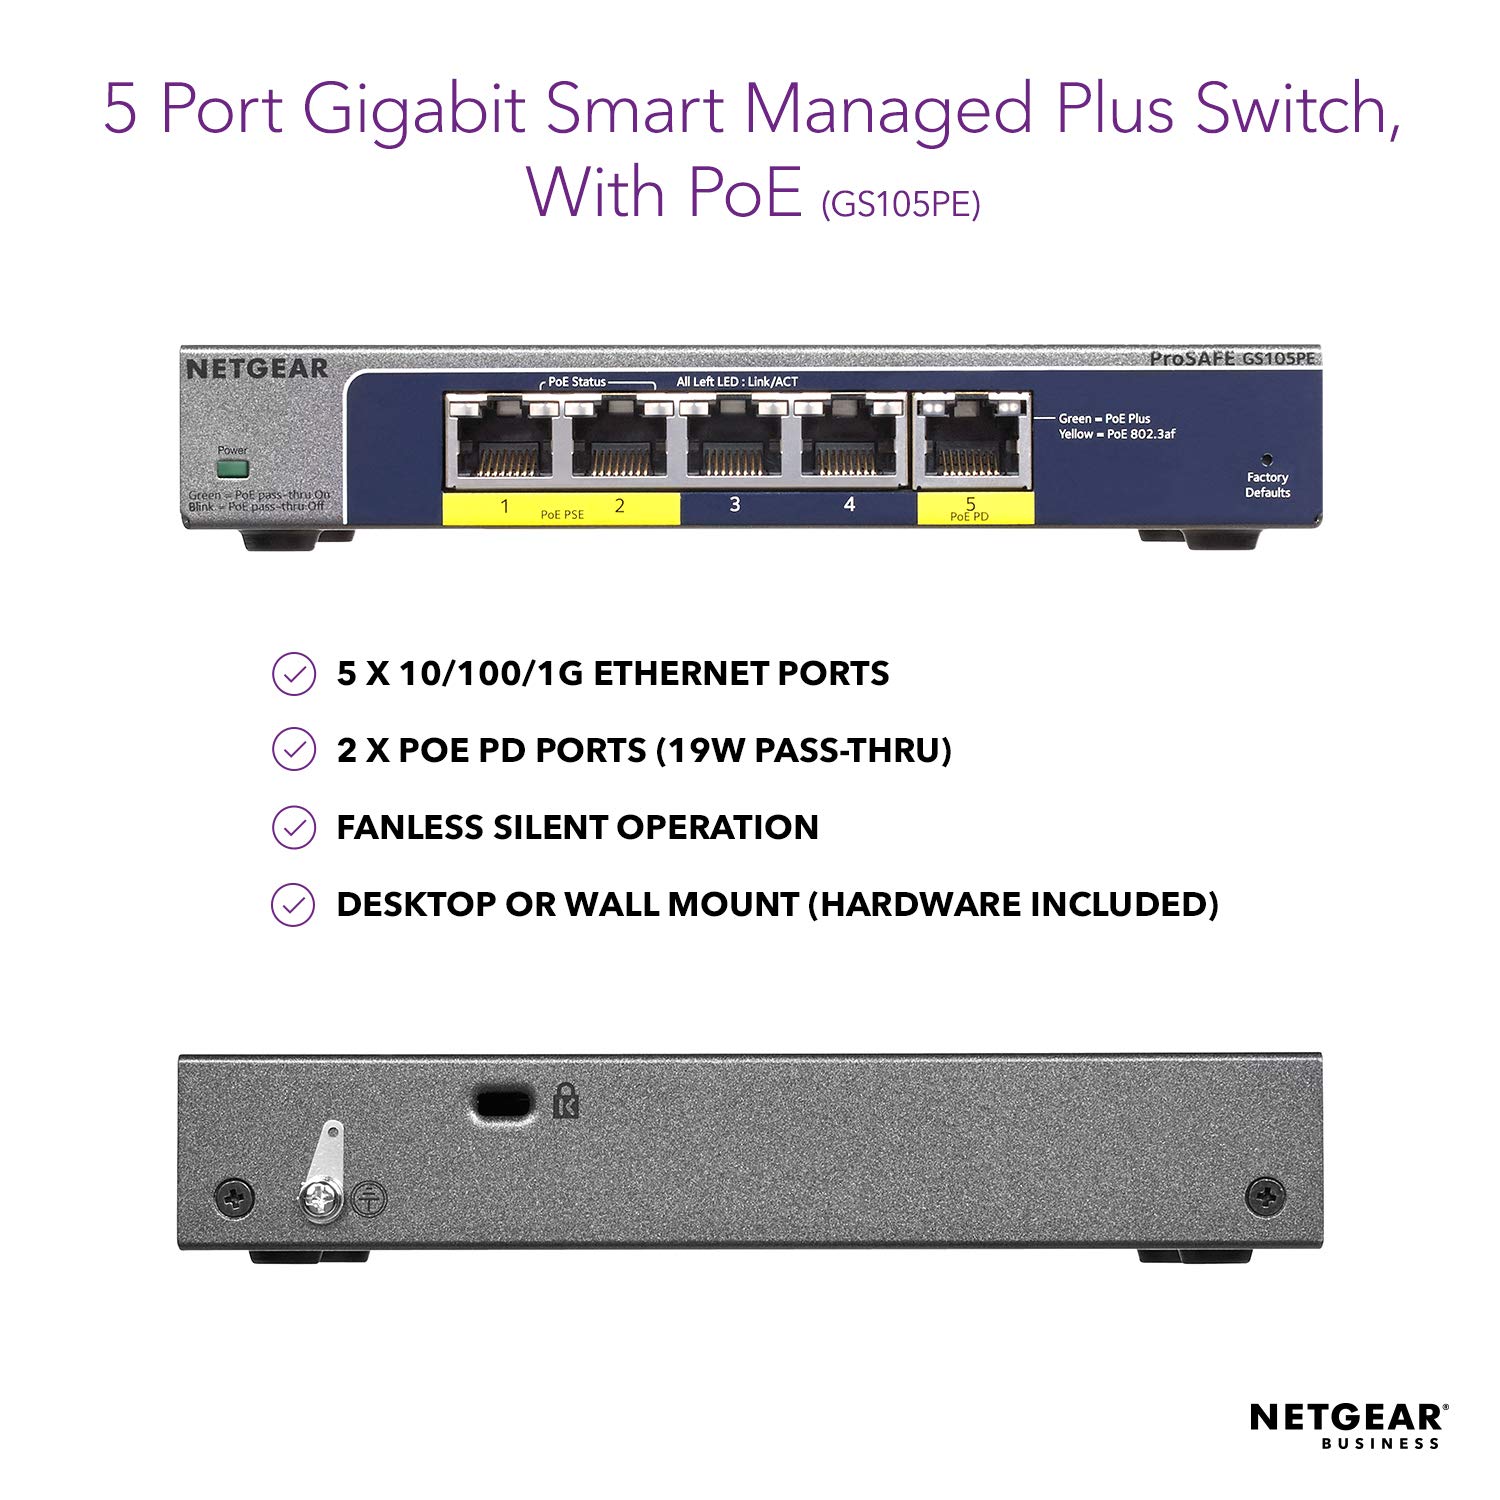 PoE-Powered 5-Port GbE Switch w/ PoE Passthrough